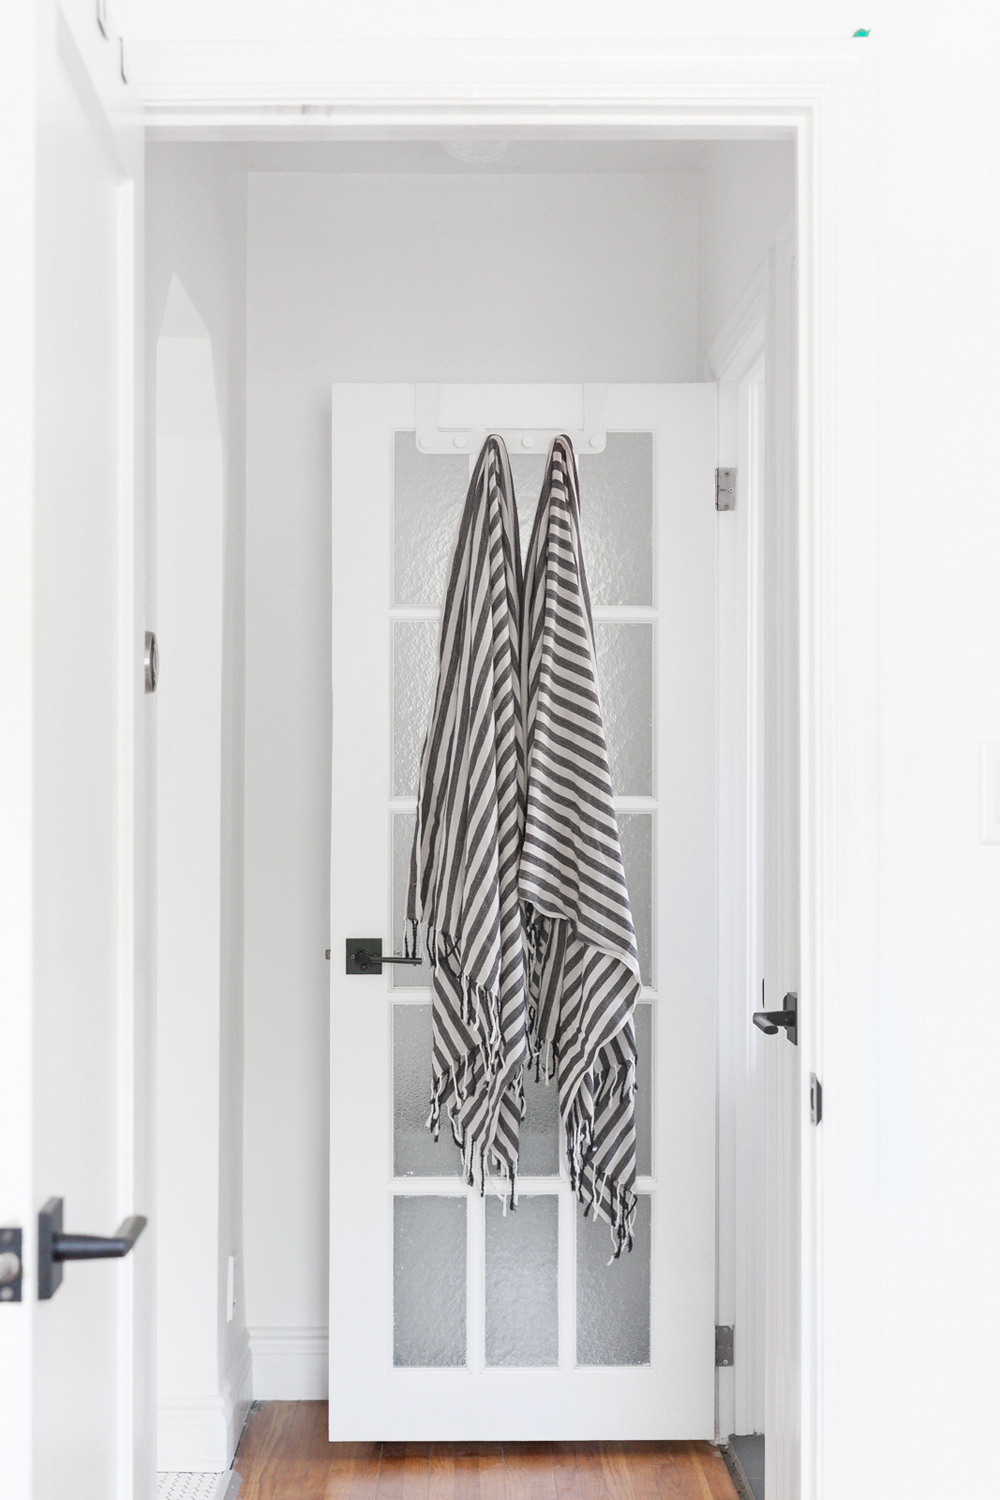 Two striped Turkish towels hanging from a hook on the bathroom door